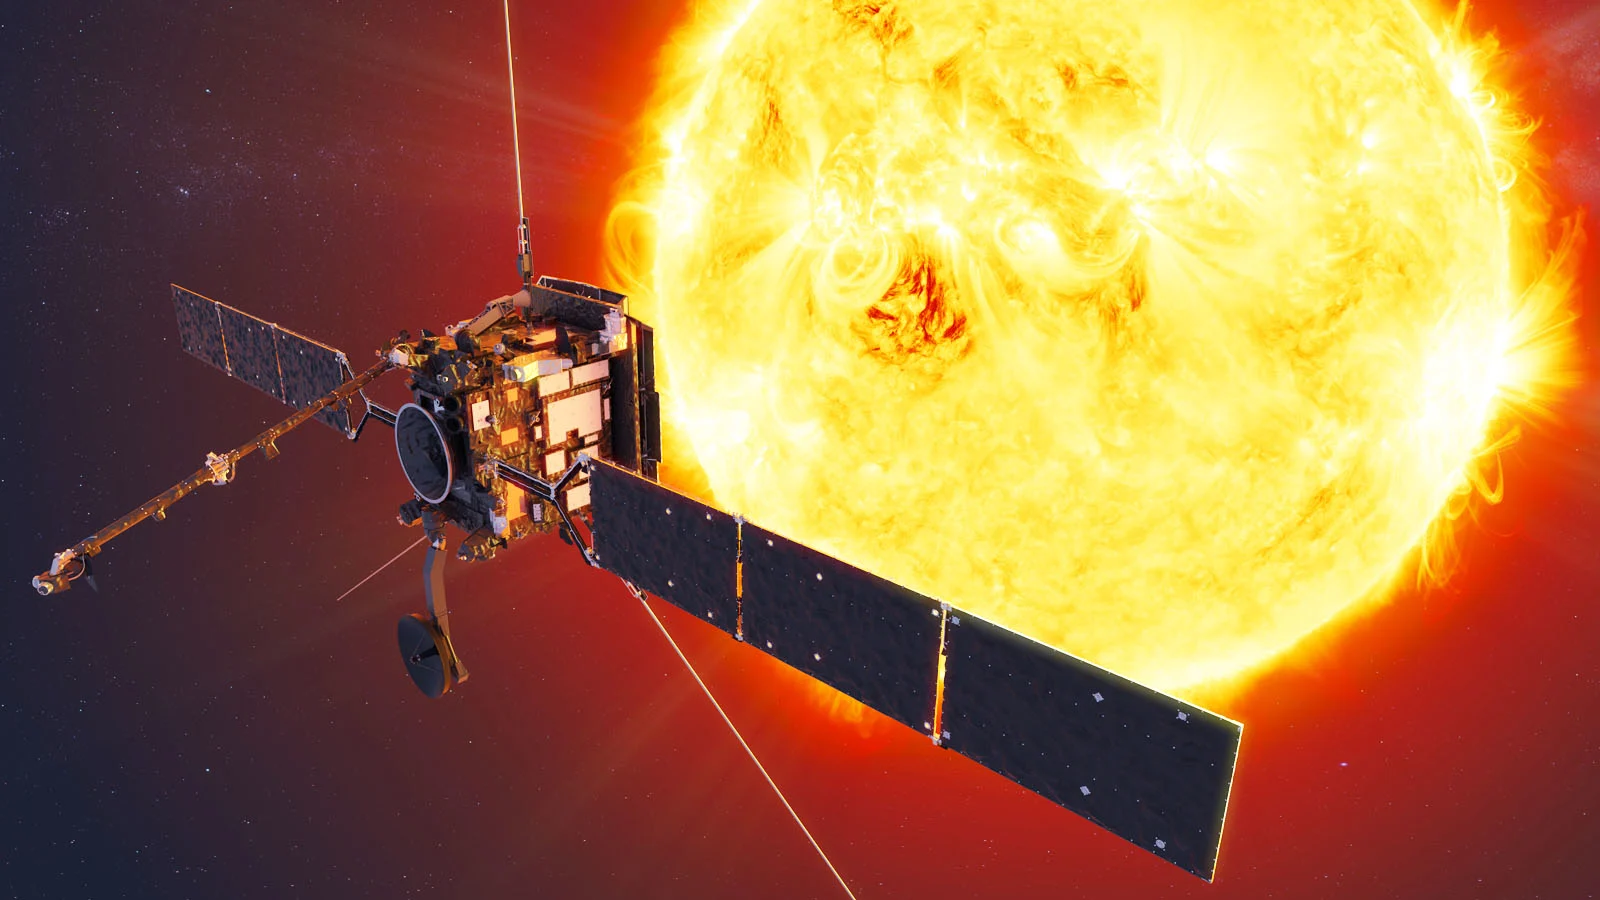 Solar Orbiter: New spacecraft to reveal never-before-seen views of the Sun